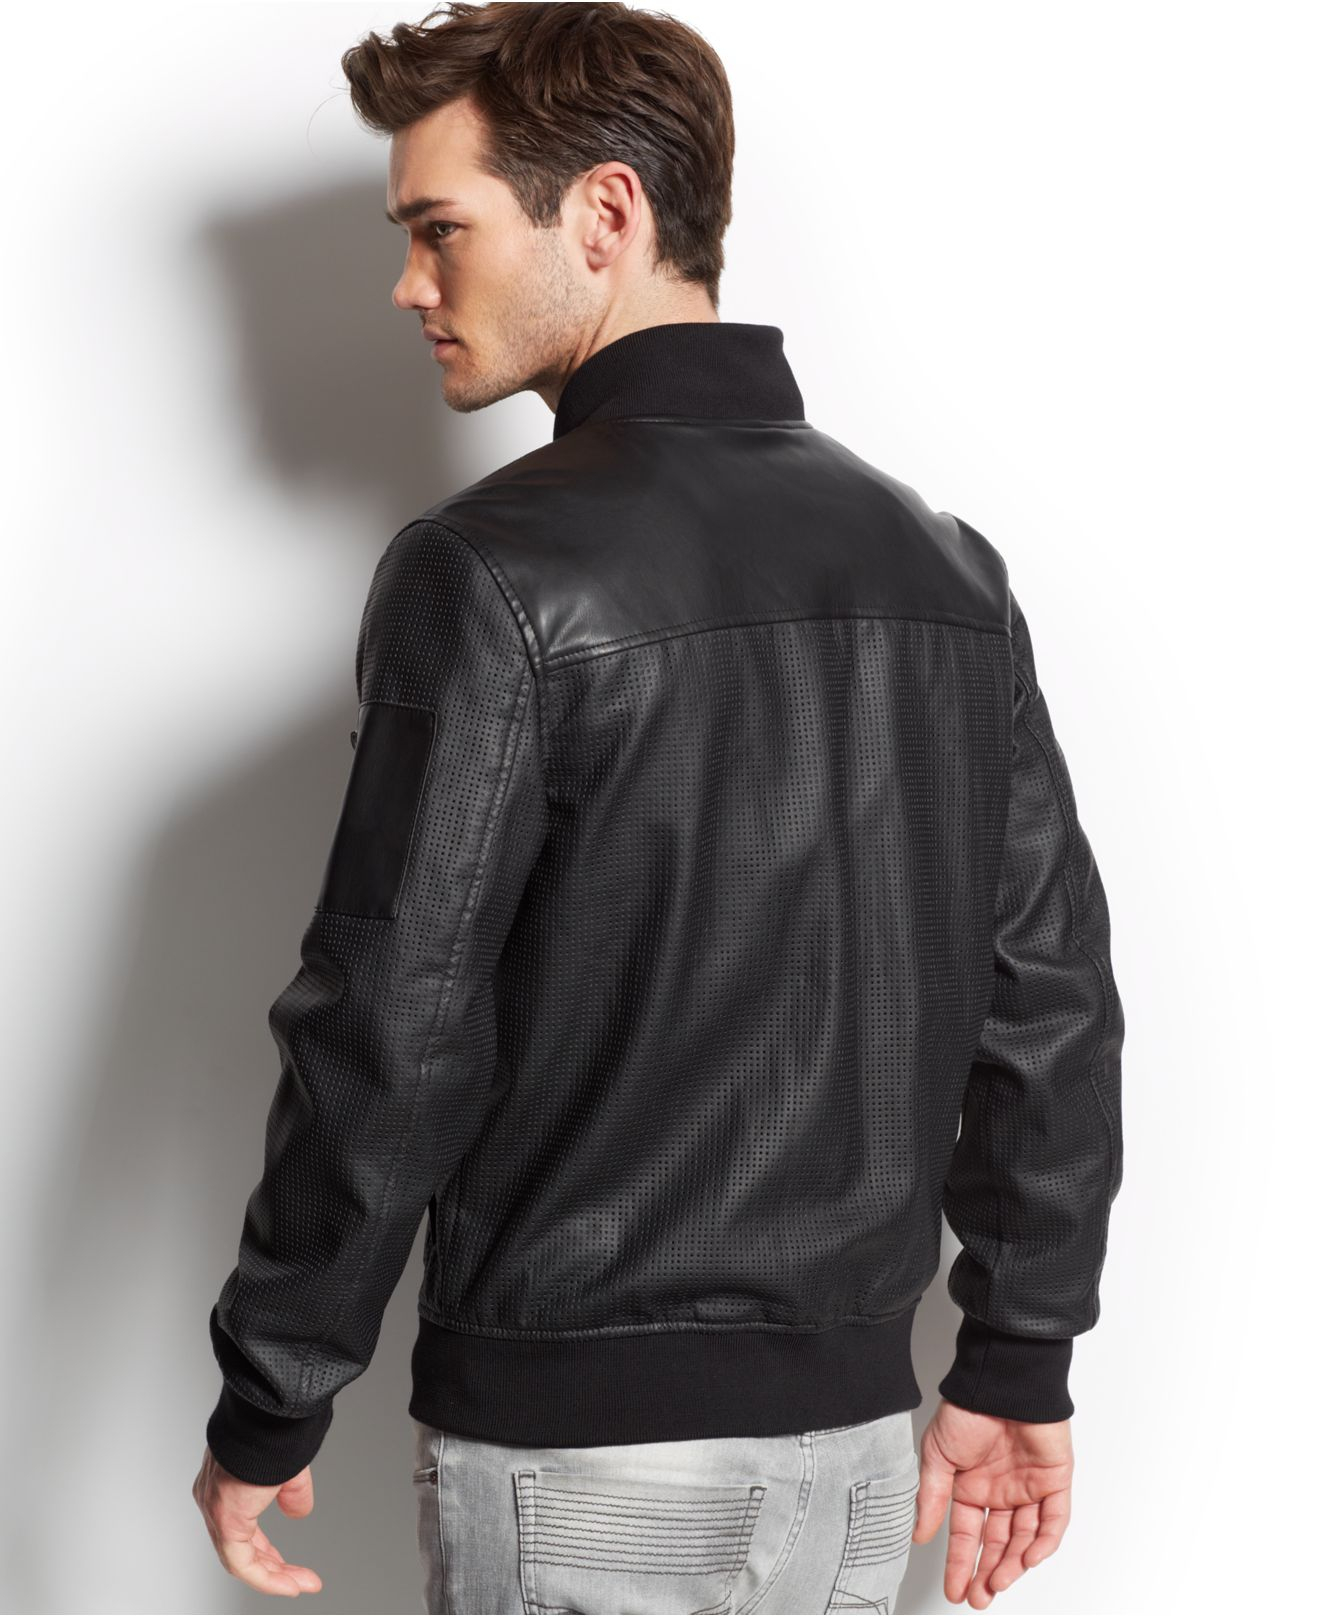 Lyst - Guess Perforated Faux-Leather Jacket in Black for Men